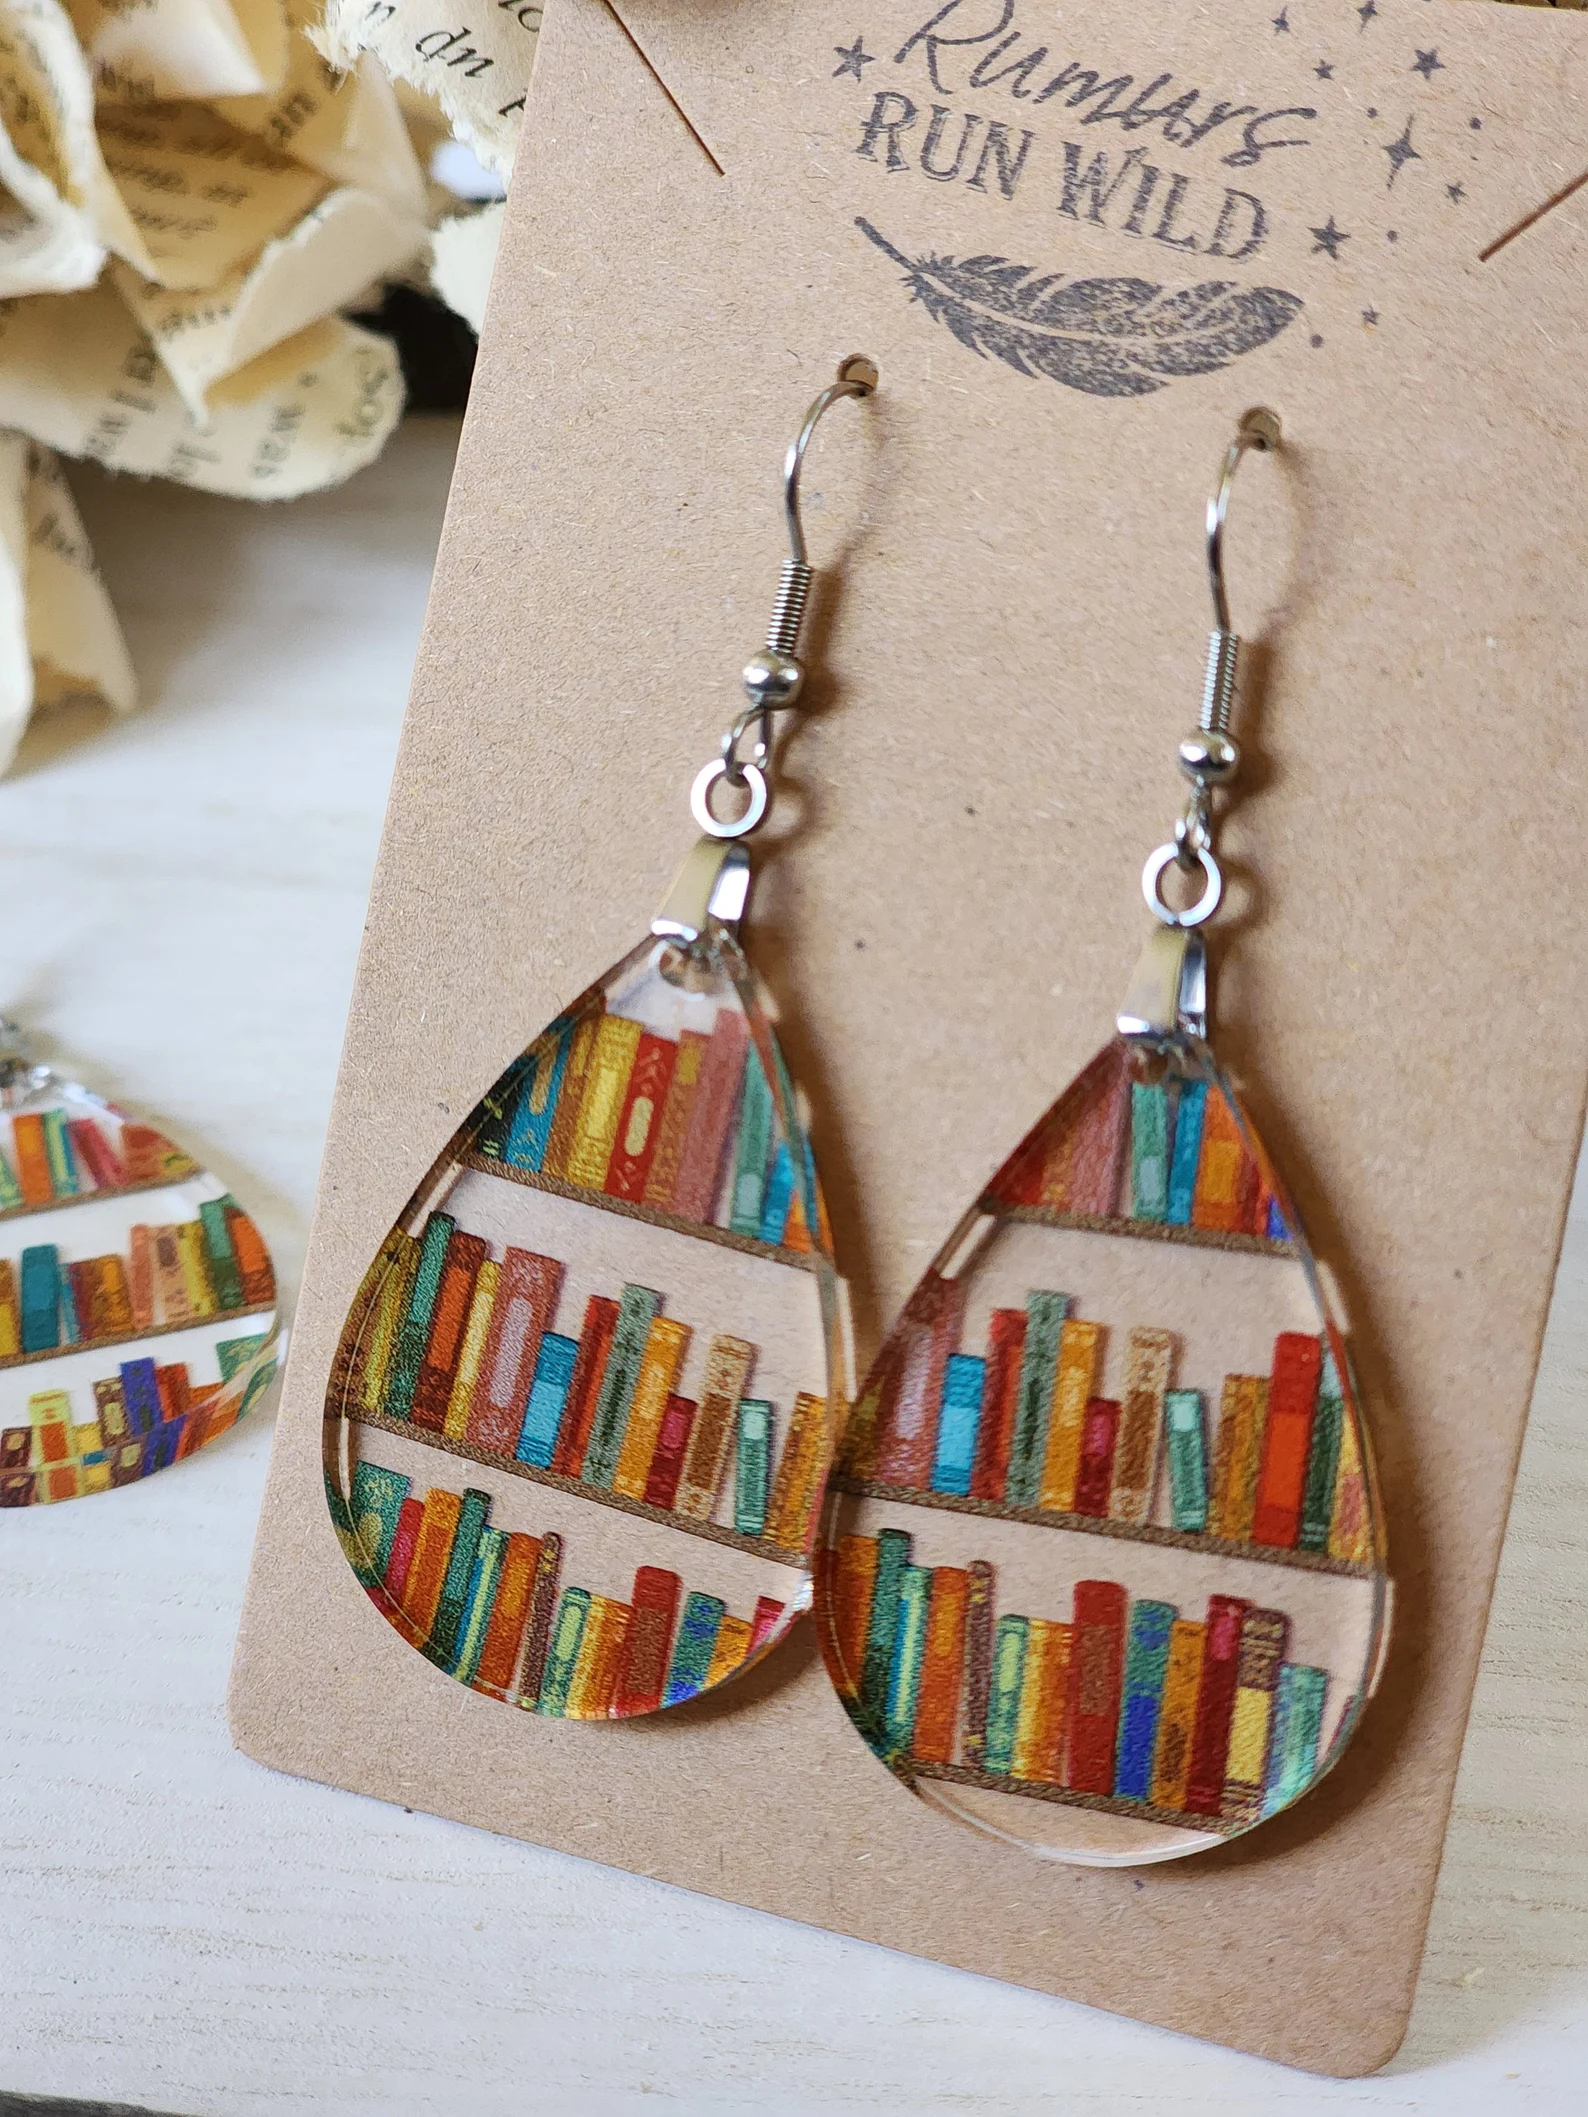 Small teardrop-shaped earrings with a design of colorful bookshelves.